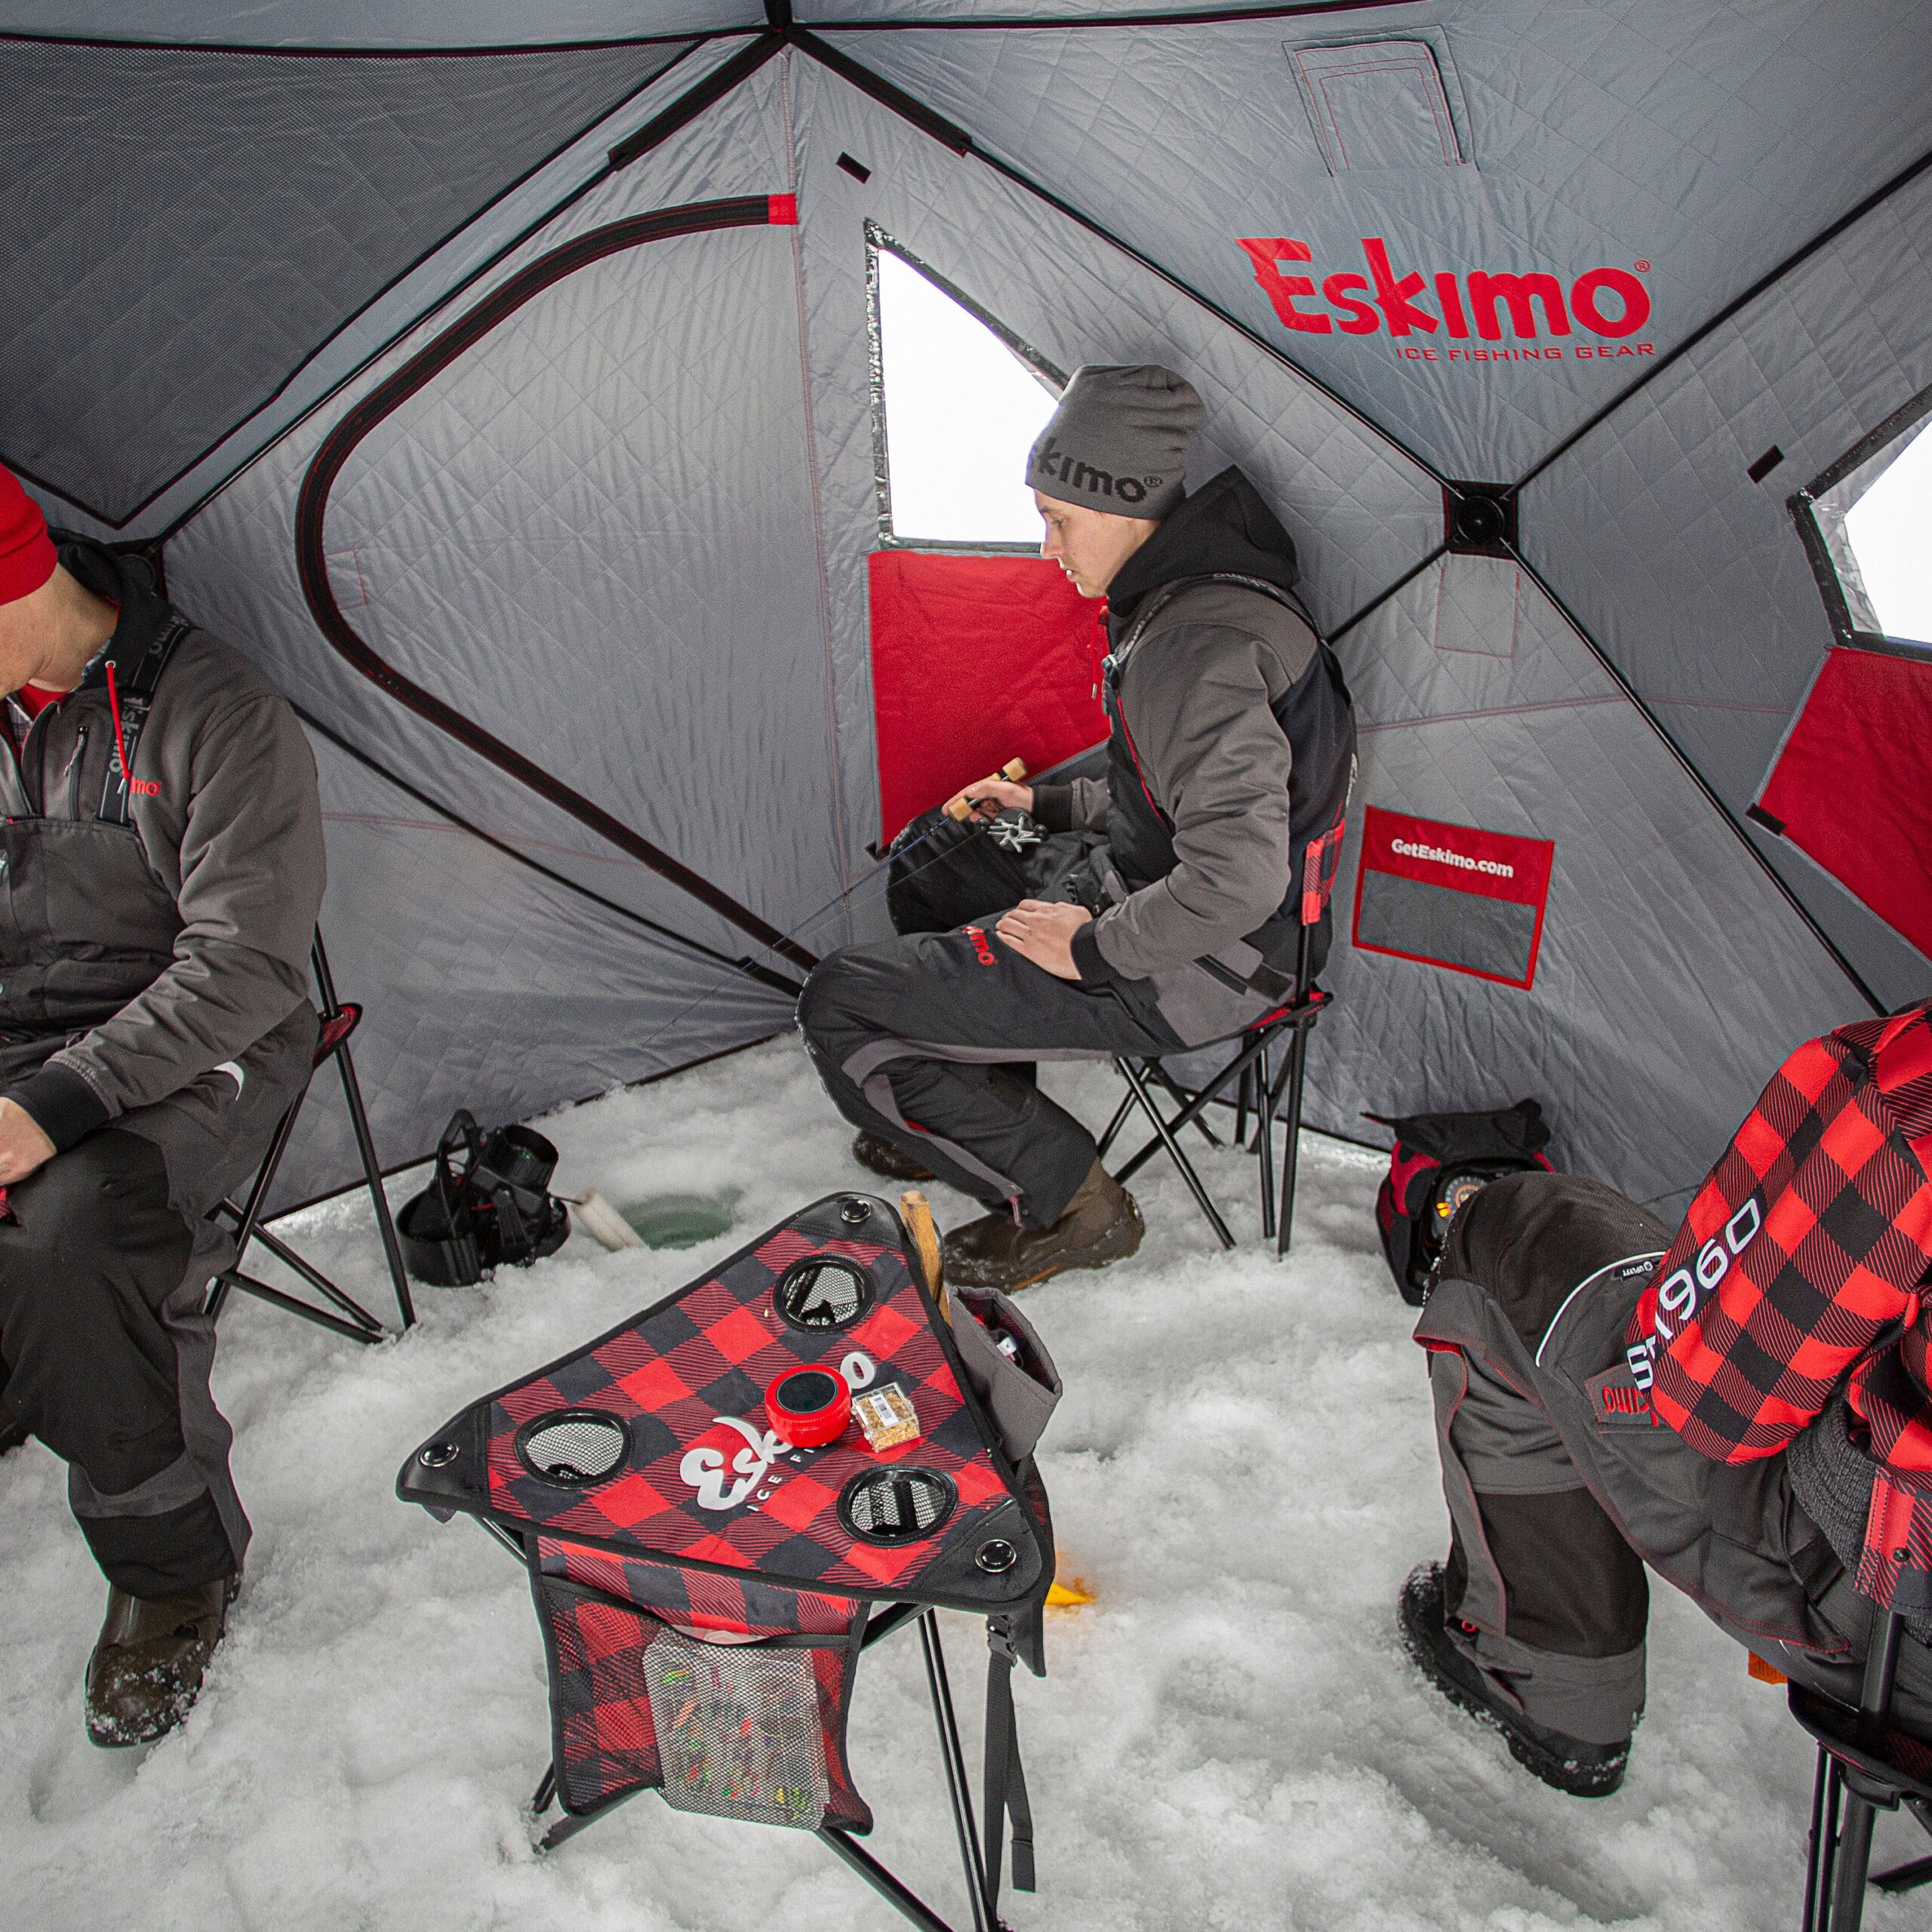 Best Budget Insulated Ice Fishing Shelter 2022-2023 🎣 - Ice Tent